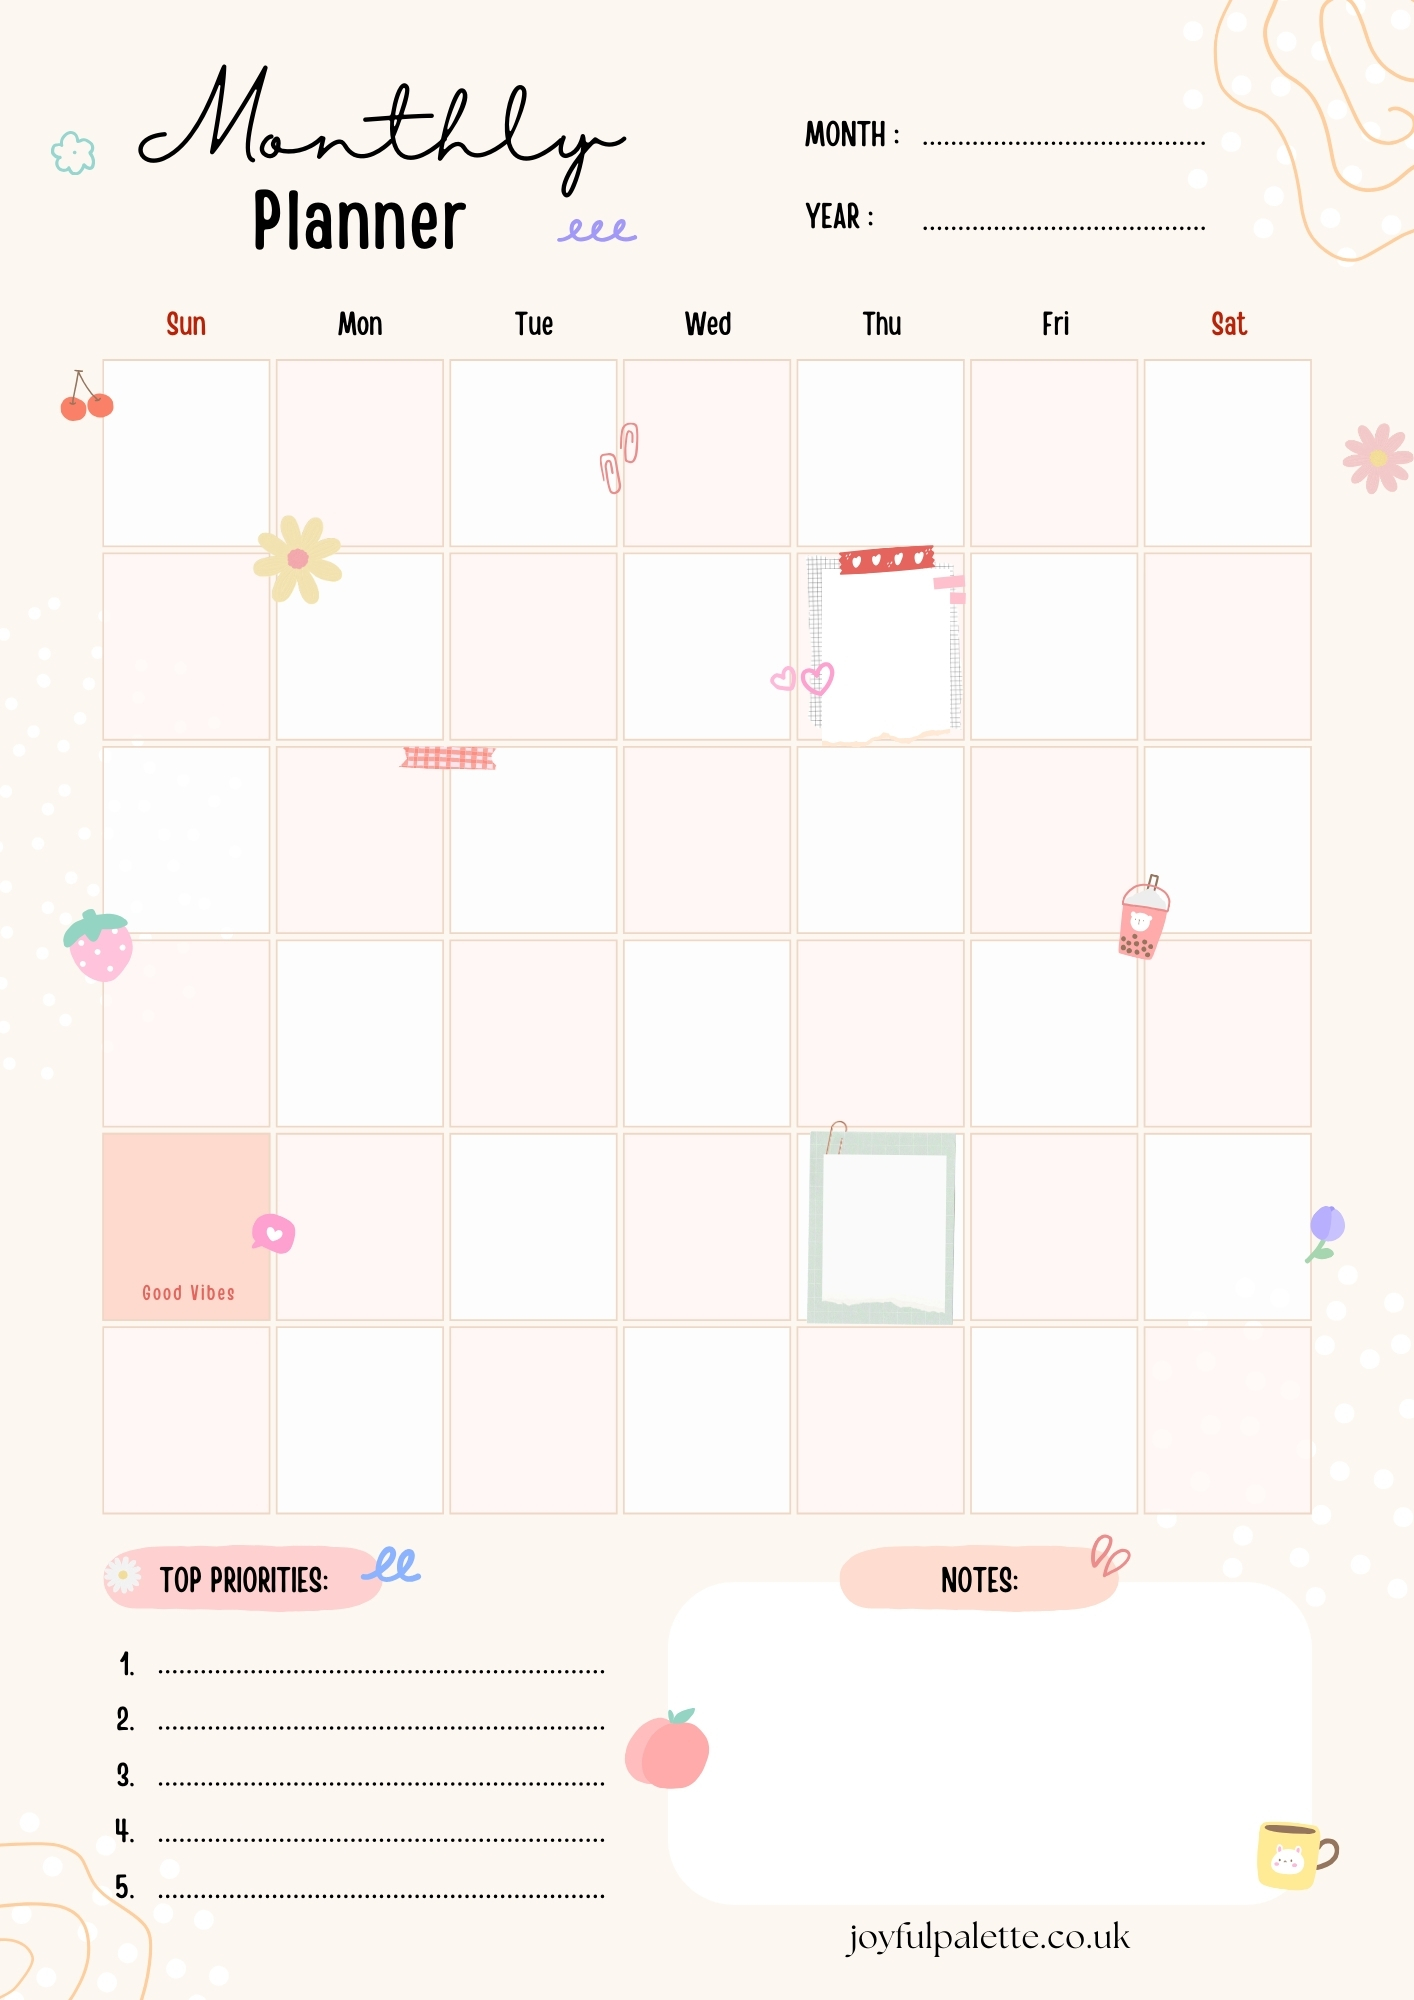 kawaii monthly planner free download